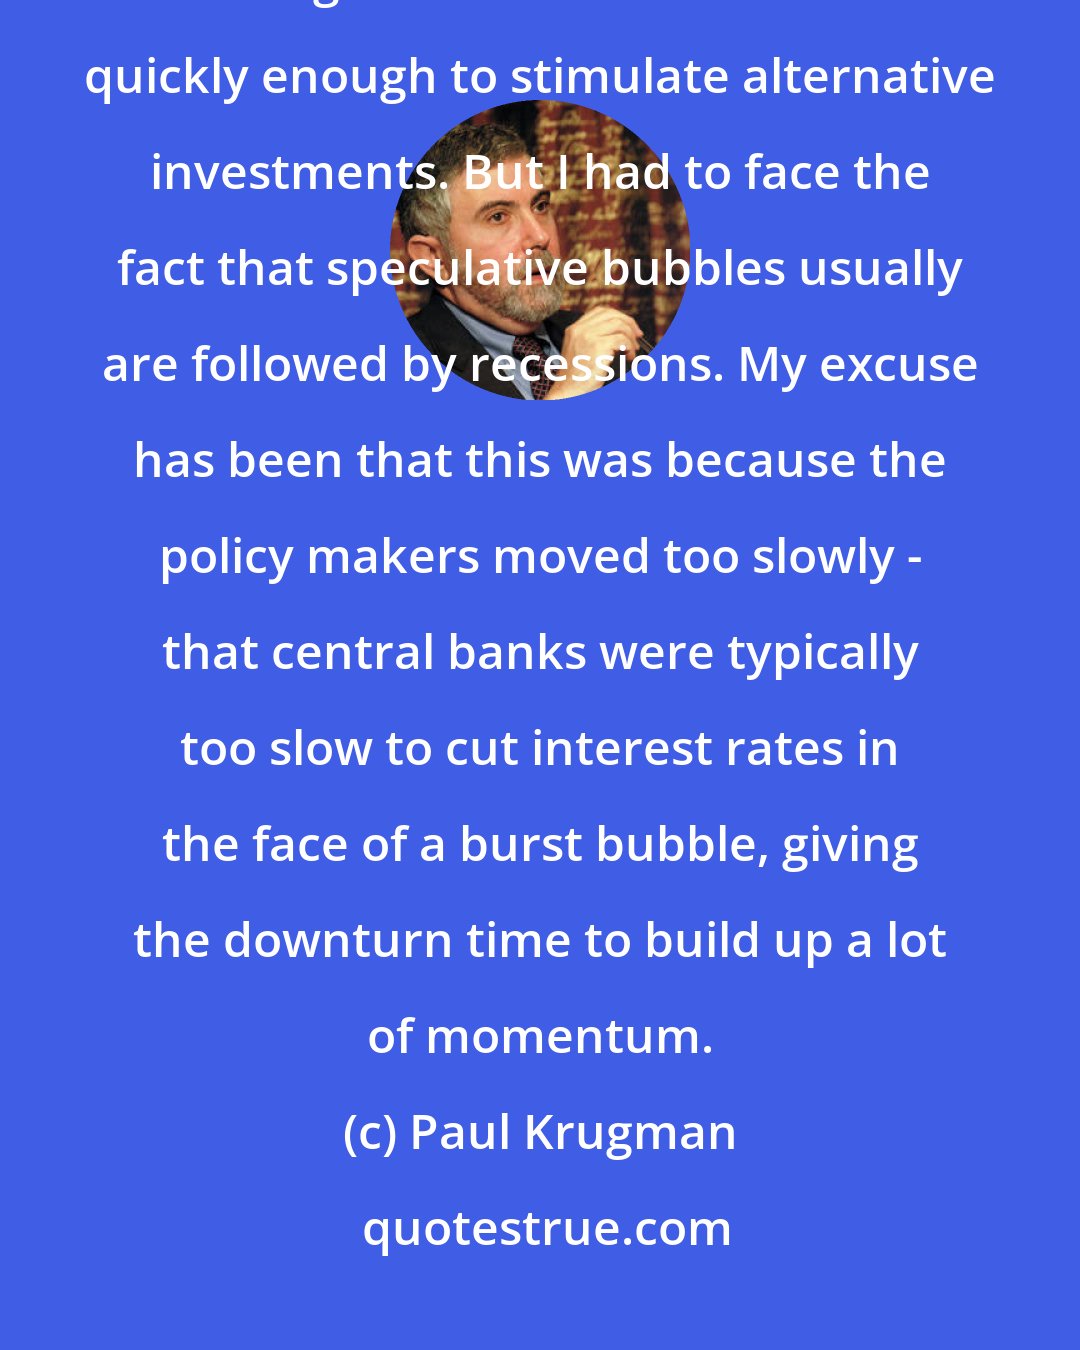 Paul Krugman: I've always believed that a speculative bubble need not lead to a recession, as long as interest rates are cut quickly enough to stimulate alternative investments. But I had to face the fact that speculative bubbles usually are followed by recessions. My excuse has been that this was because the policy makers moved too slowly - that central banks were typically too slow to cut interest rates in the face of a burst bubble, giving the downturn time to build up a lot of momentum.